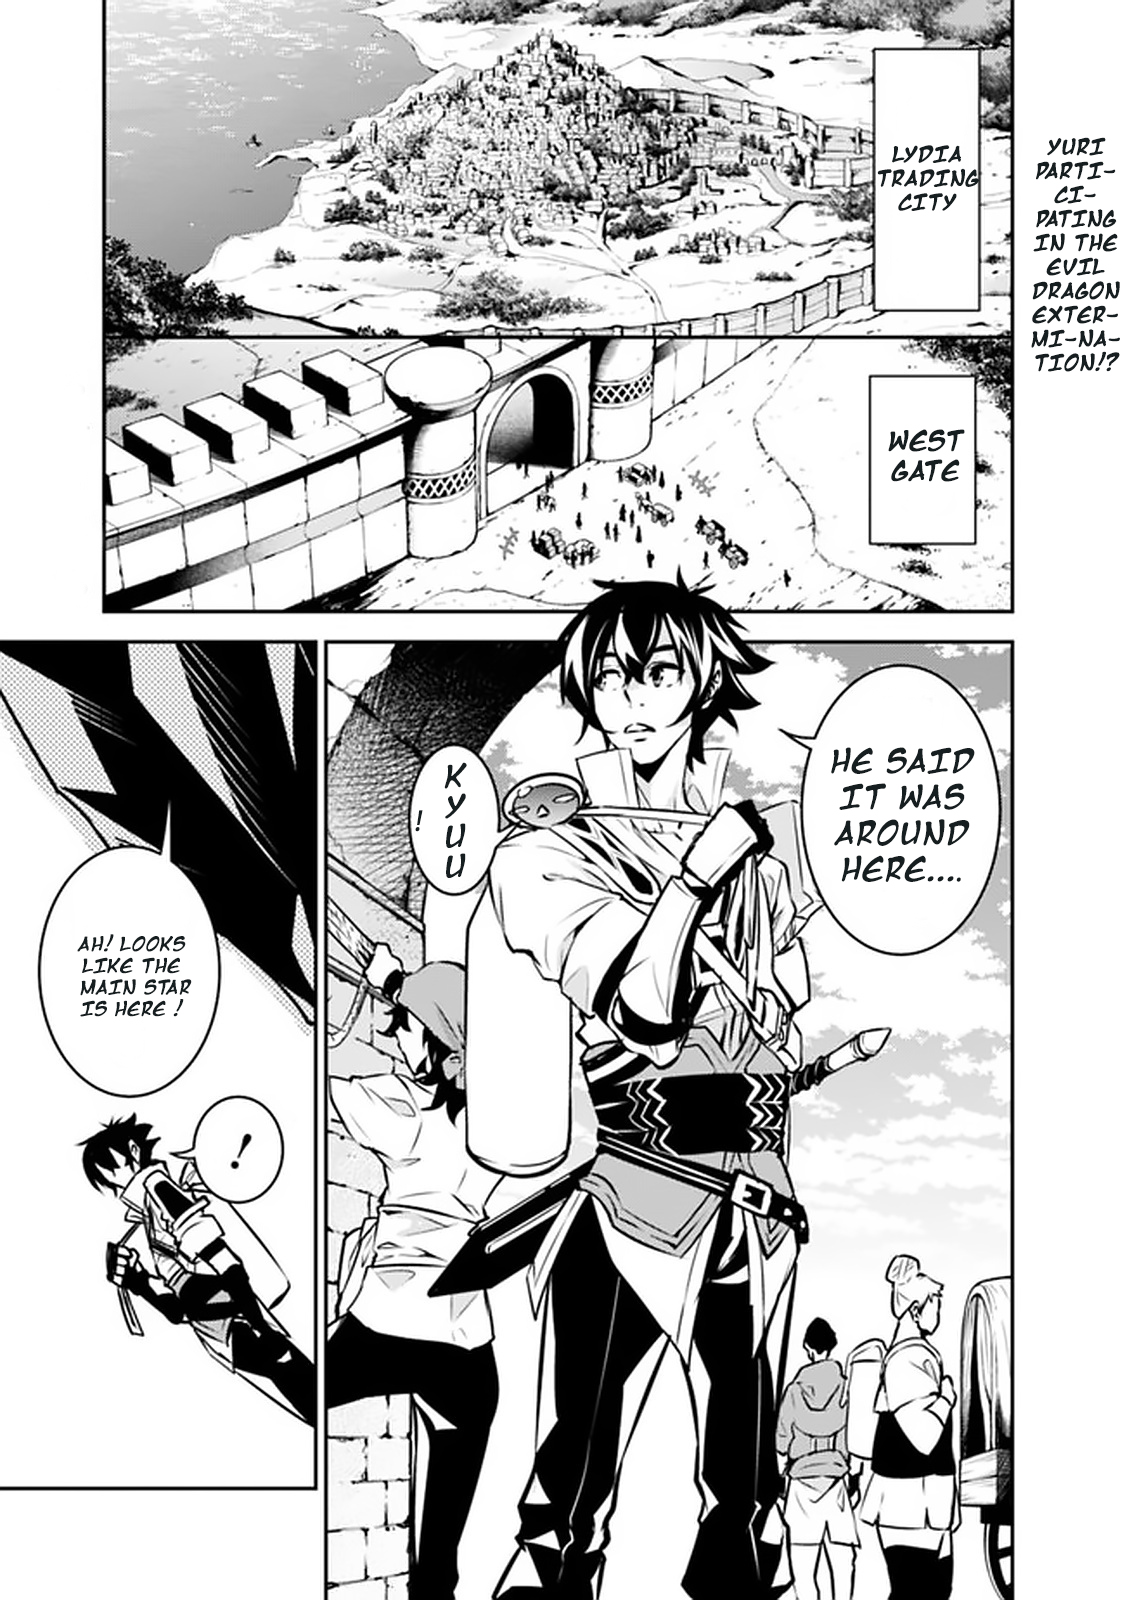 The Strongest Magical Swordsman Ever Reborn As An F-Rank Adventurer. Vol.3 Chapter 32 - Picture 1